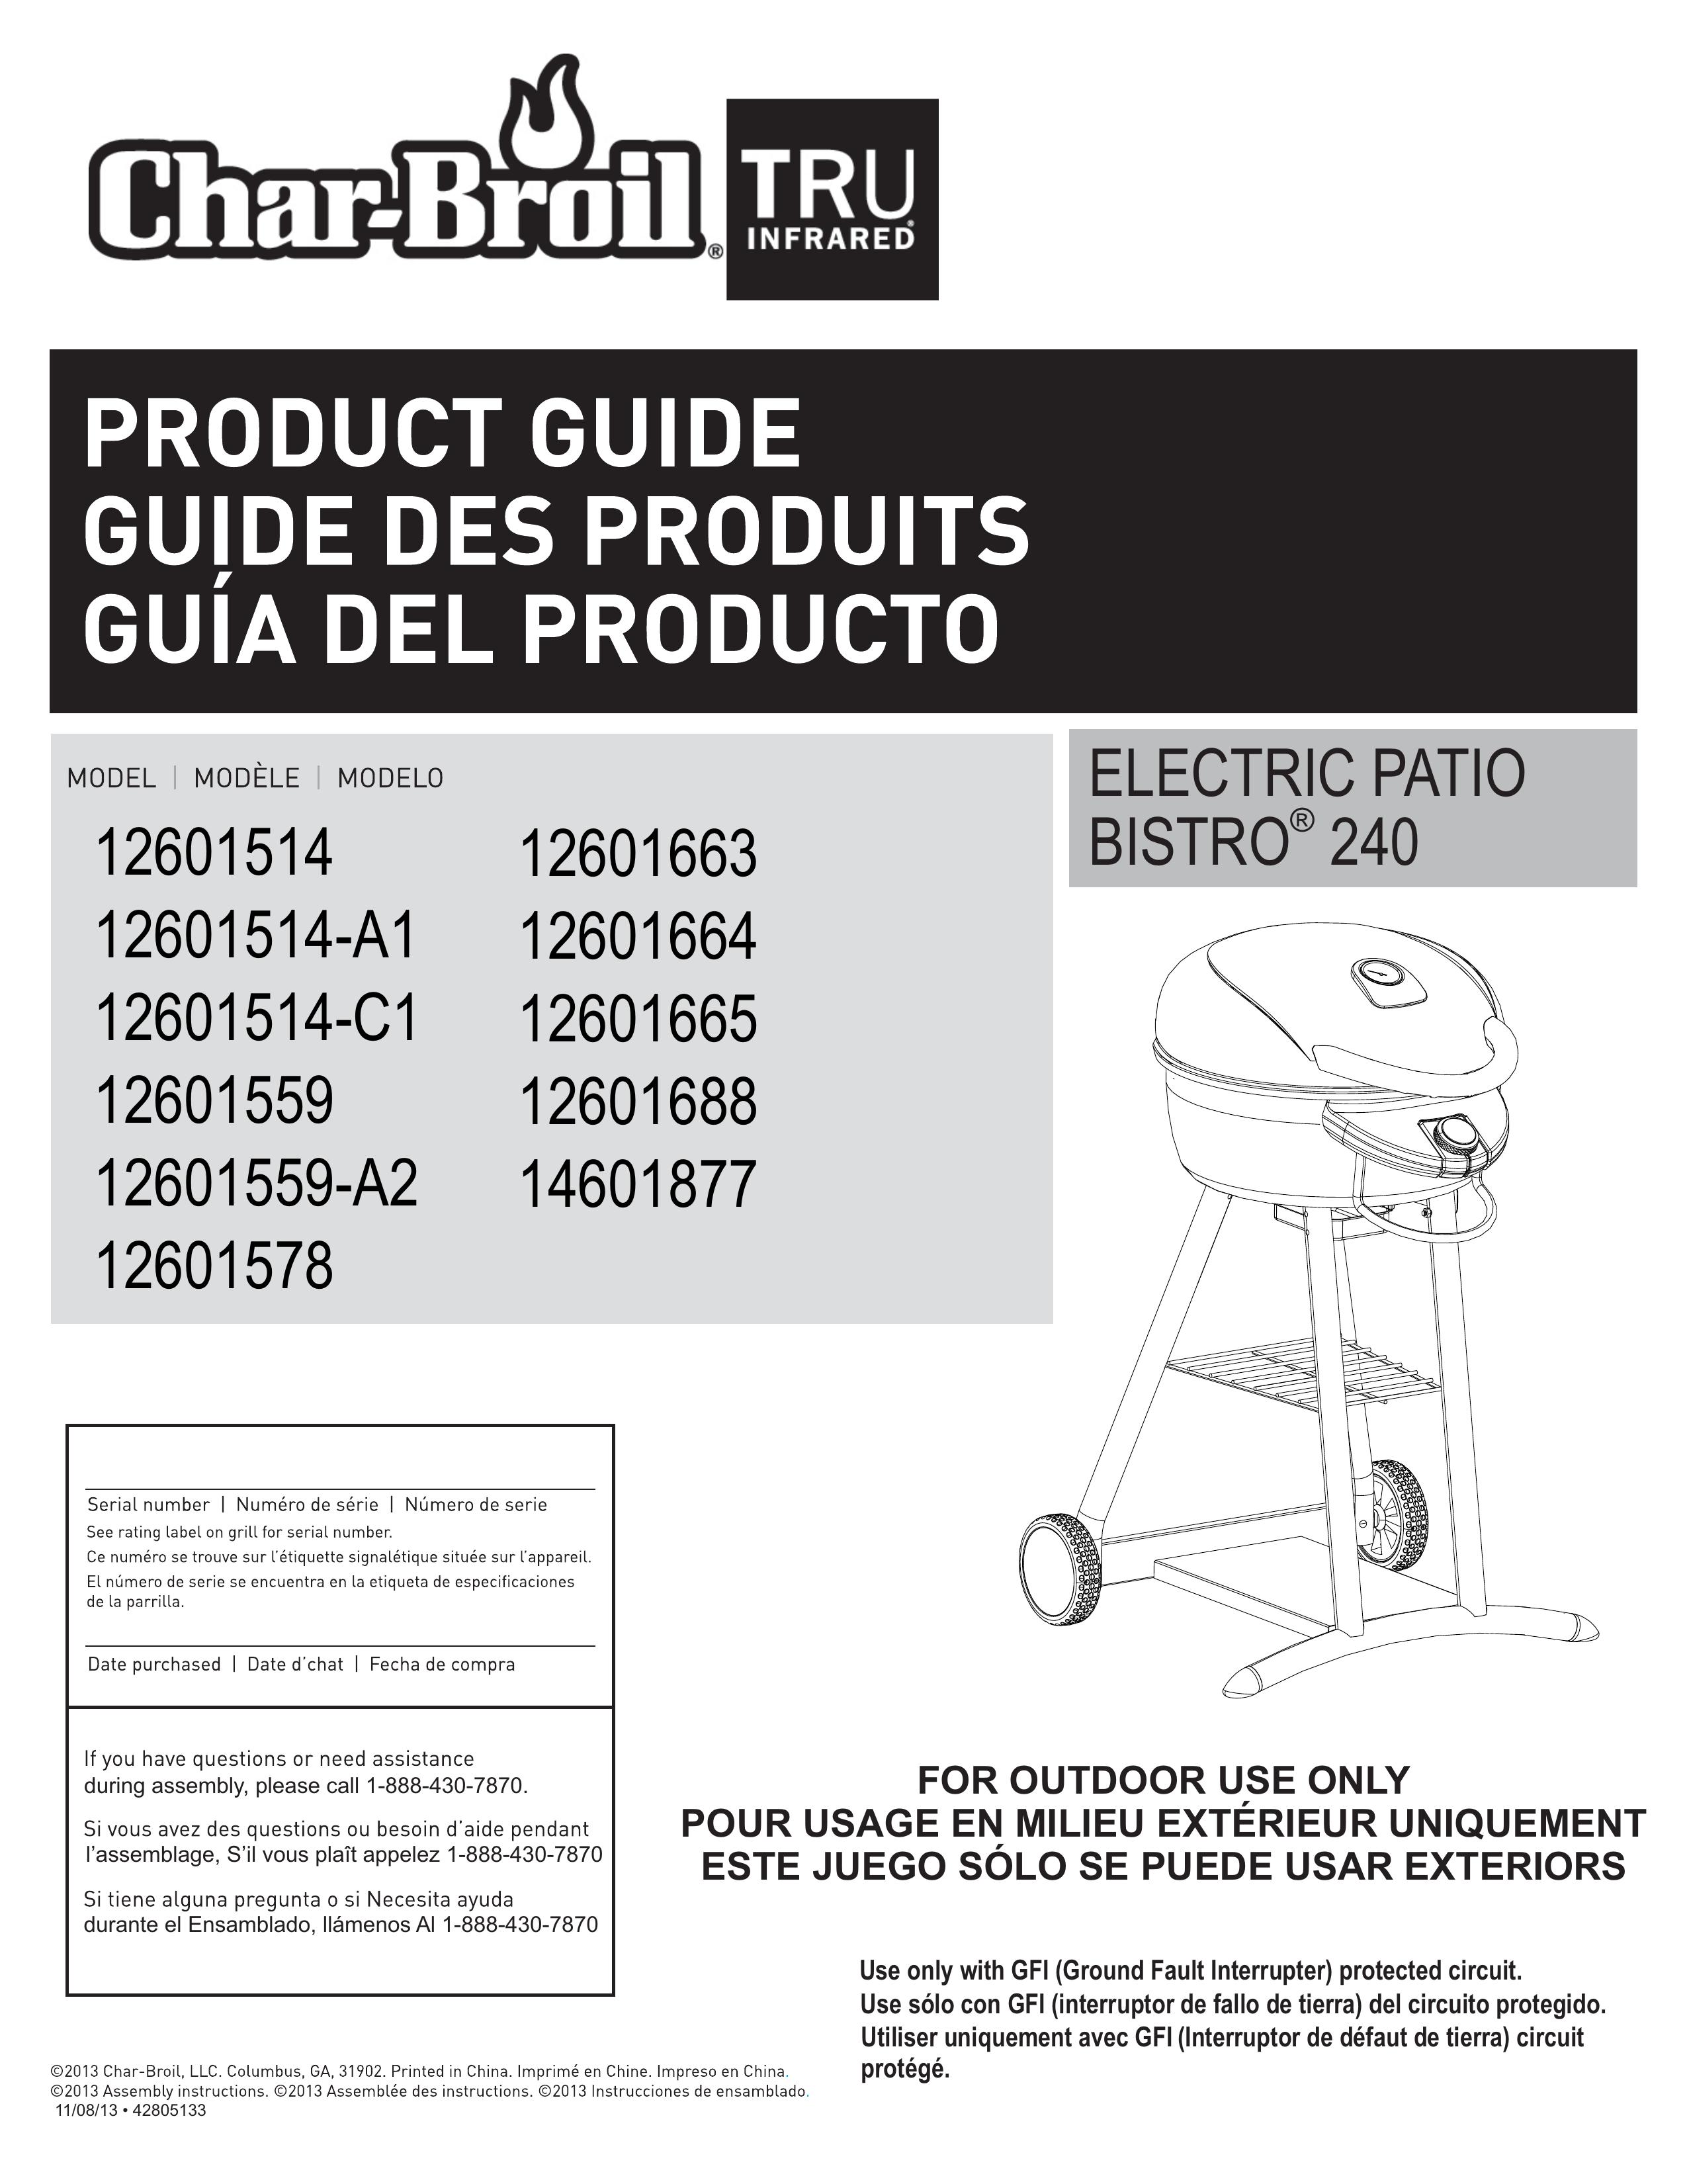 Char-Broil 12601514-C1 Electric Grill User Manual (Page 1)